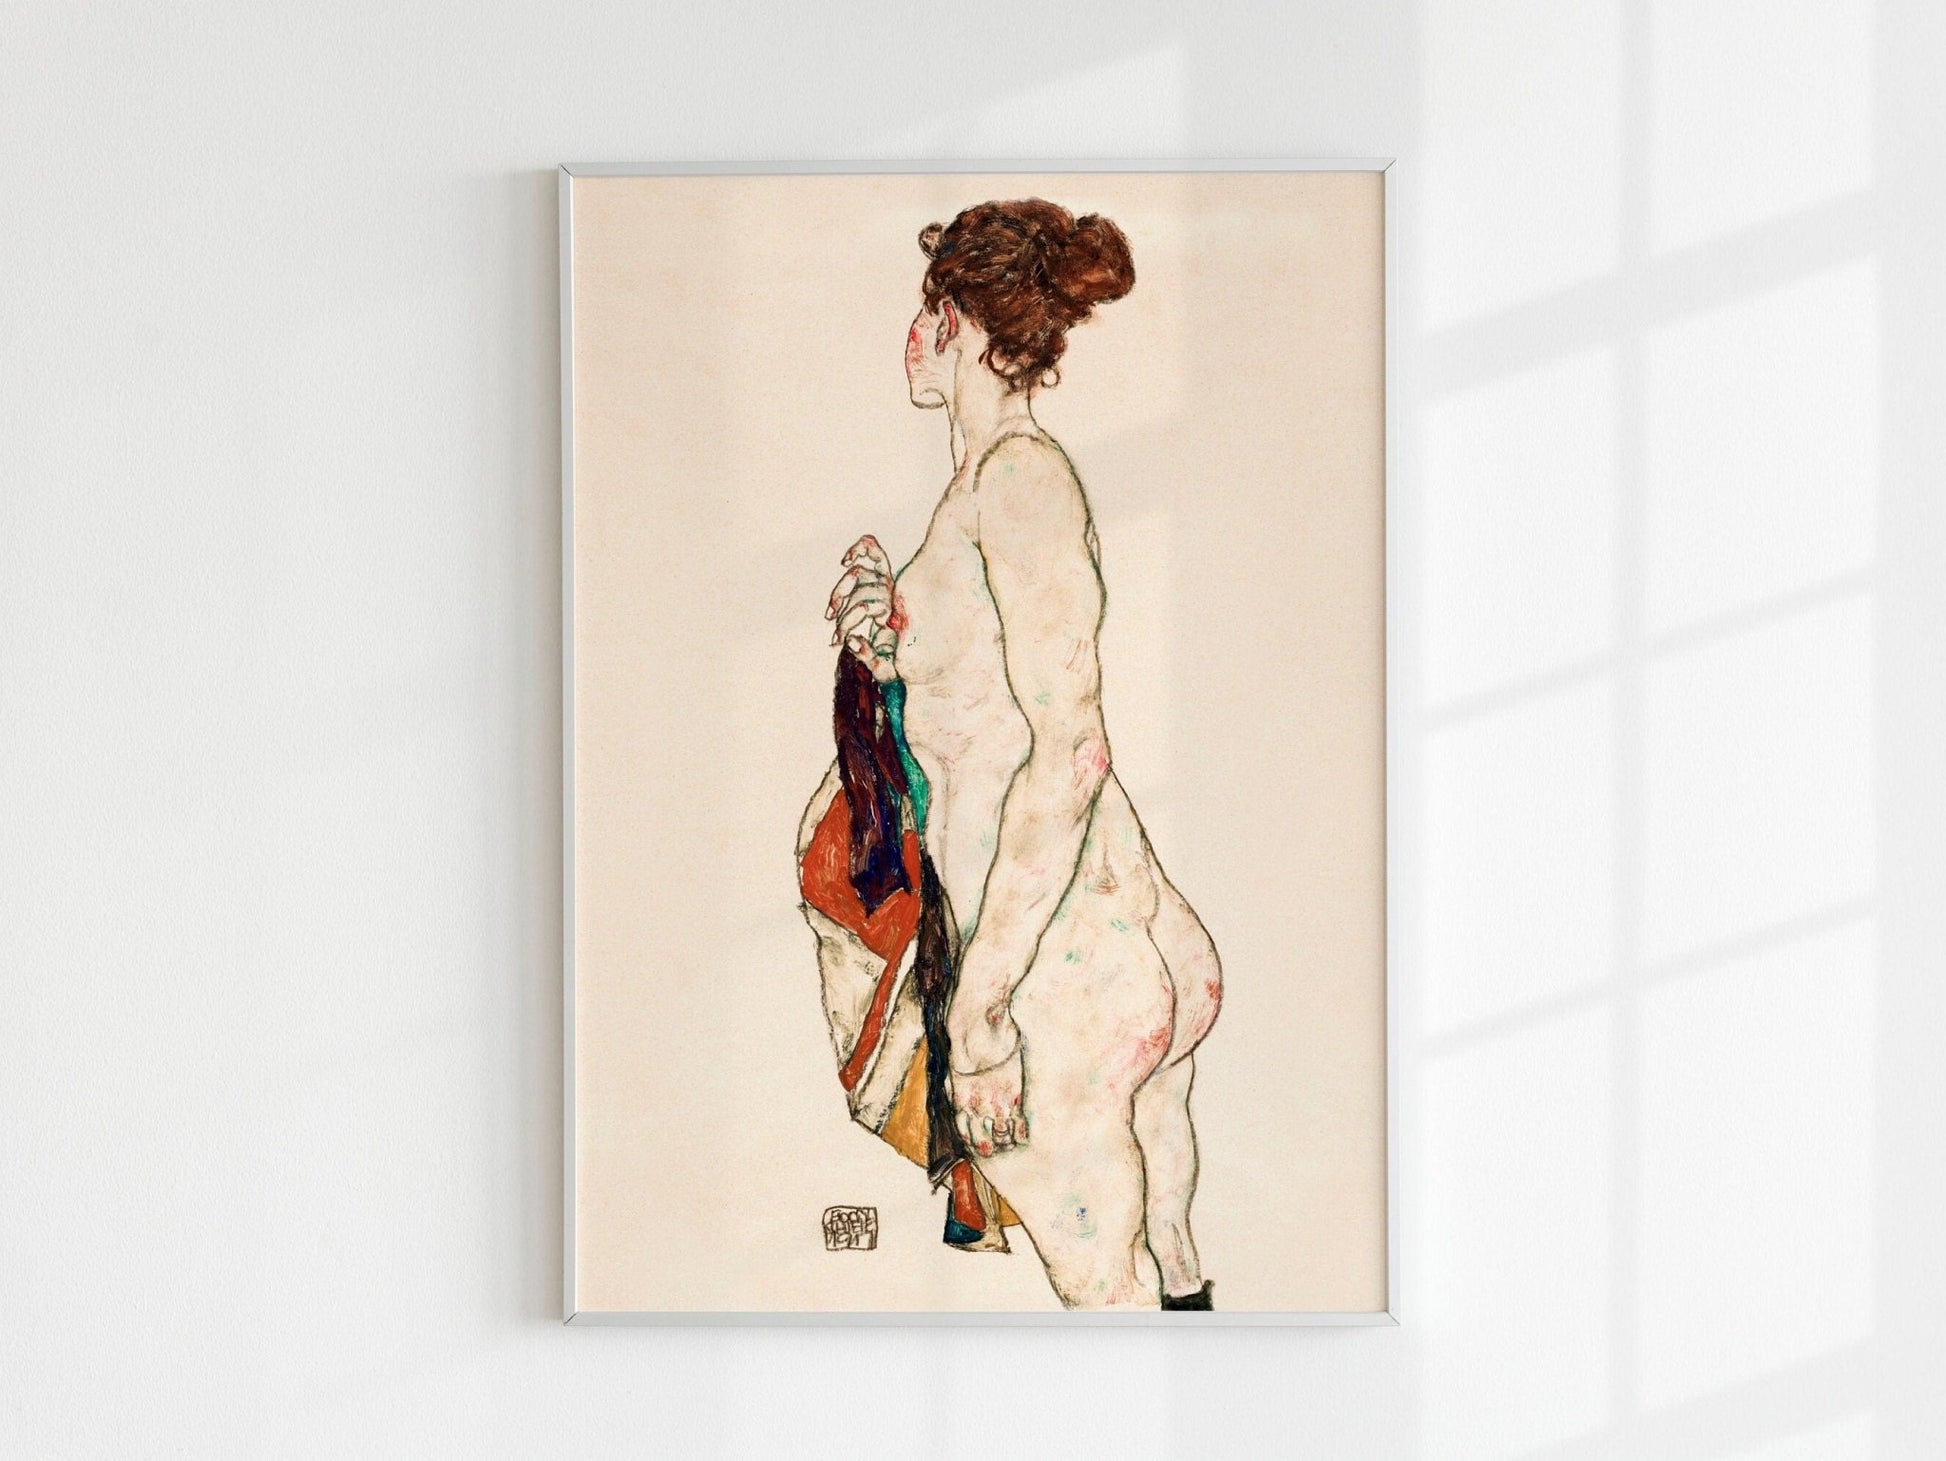 EGON SCHIELE - Standing Nude Woman With A Patterned Robe - Pathos Studio - Art Prints